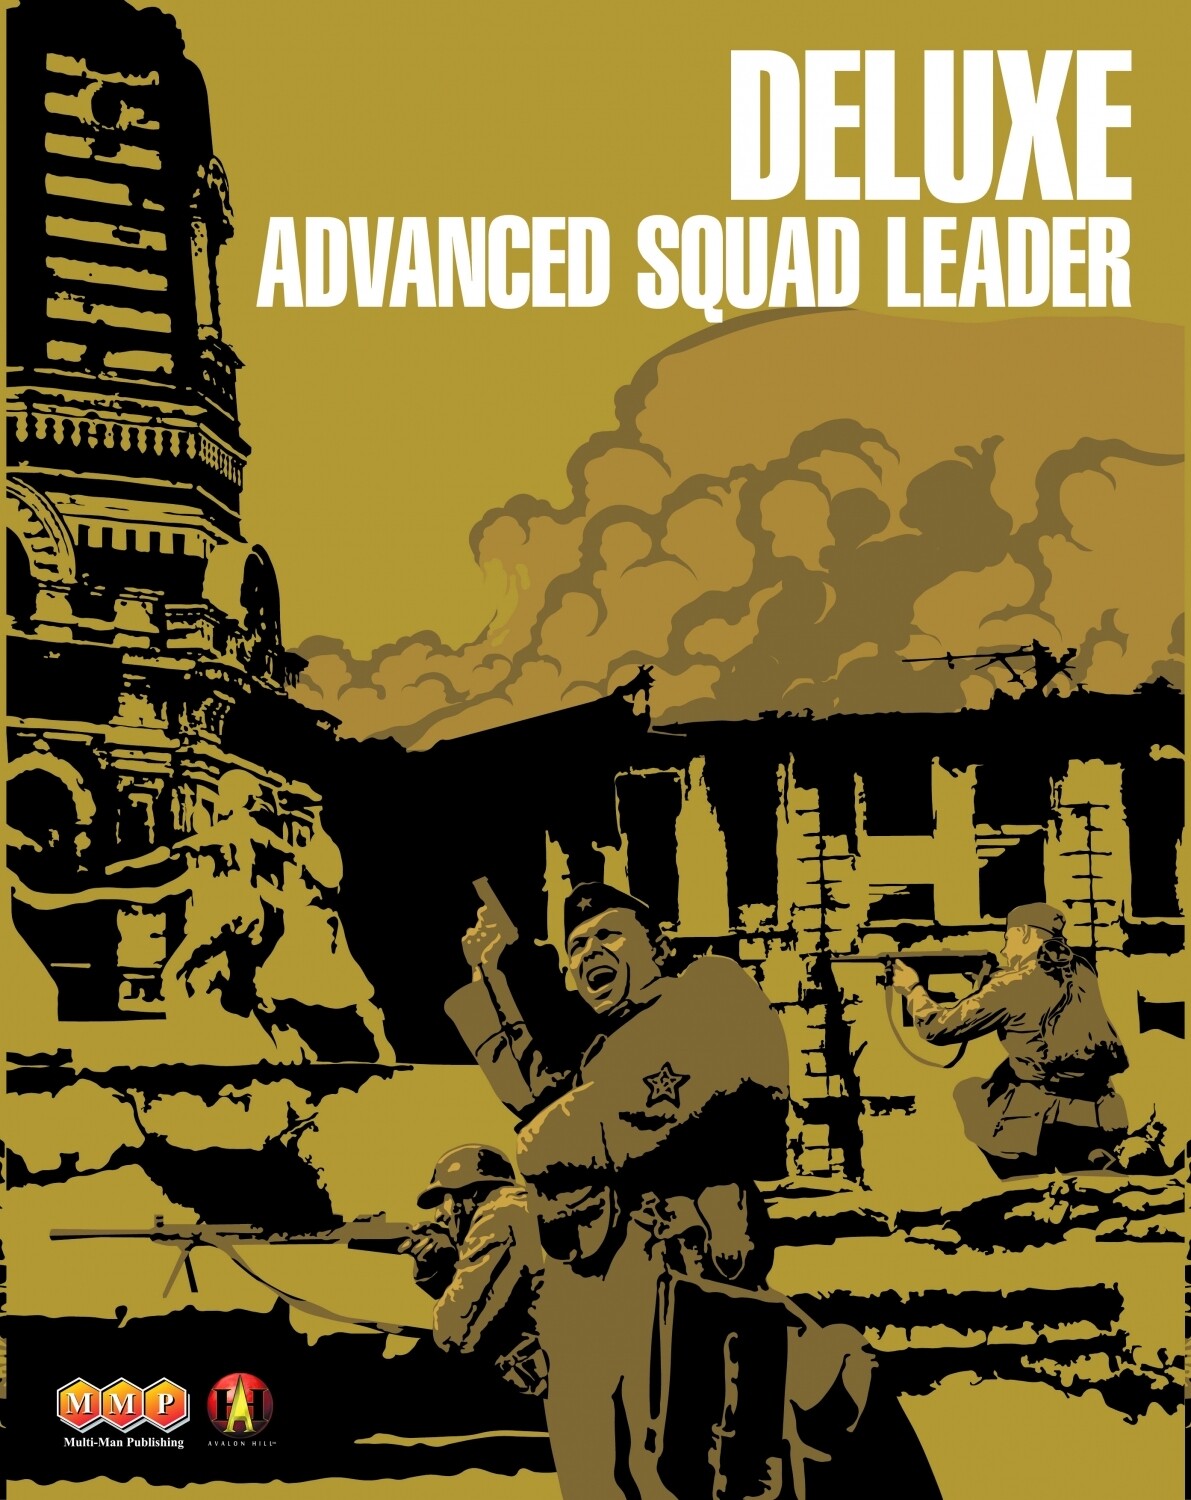 Deluxe Advanced Squad Leader (ASL)